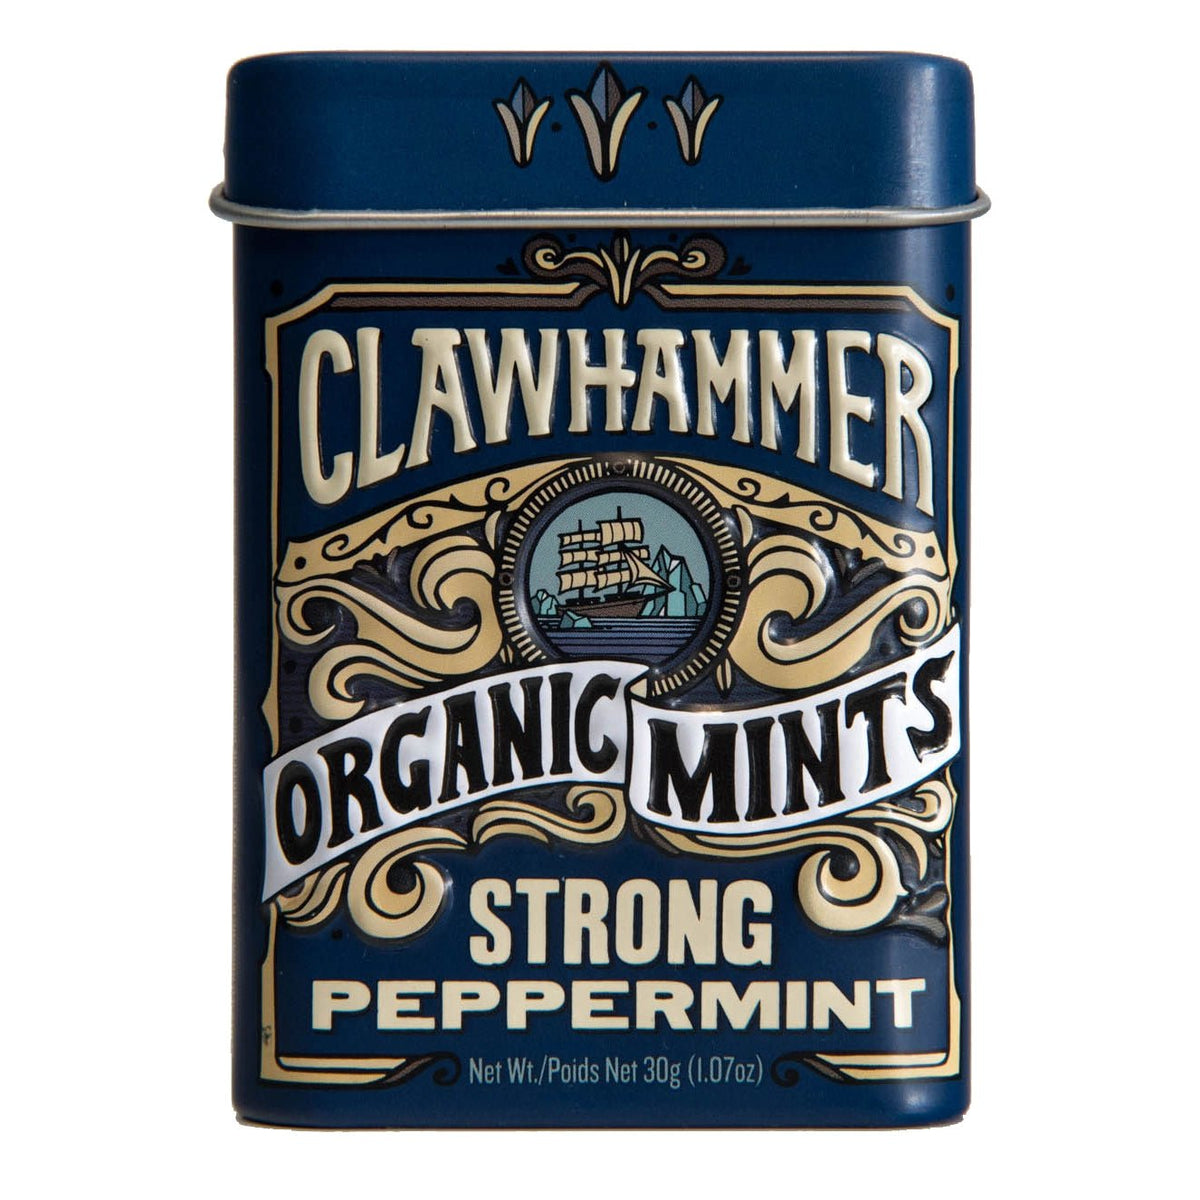 Strong Peppermint Organic Mints